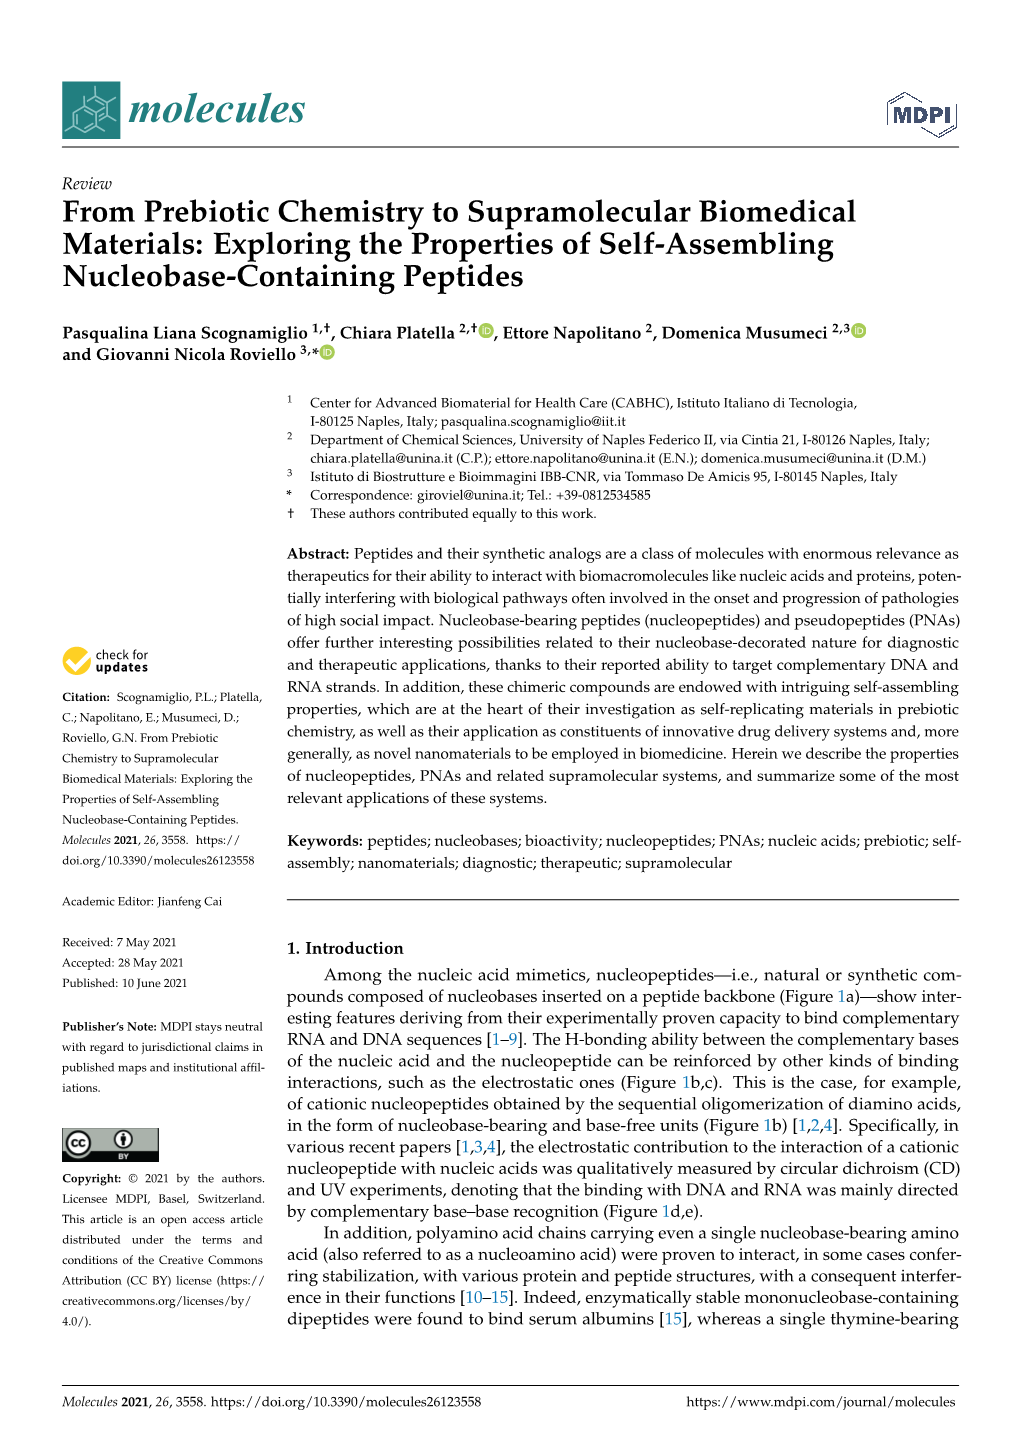 From Prebiotic Chemistry to Supramolecular Biomedical Materials: Exploring the Properties of Self-Assembling Nucleobase-Containing Peptides